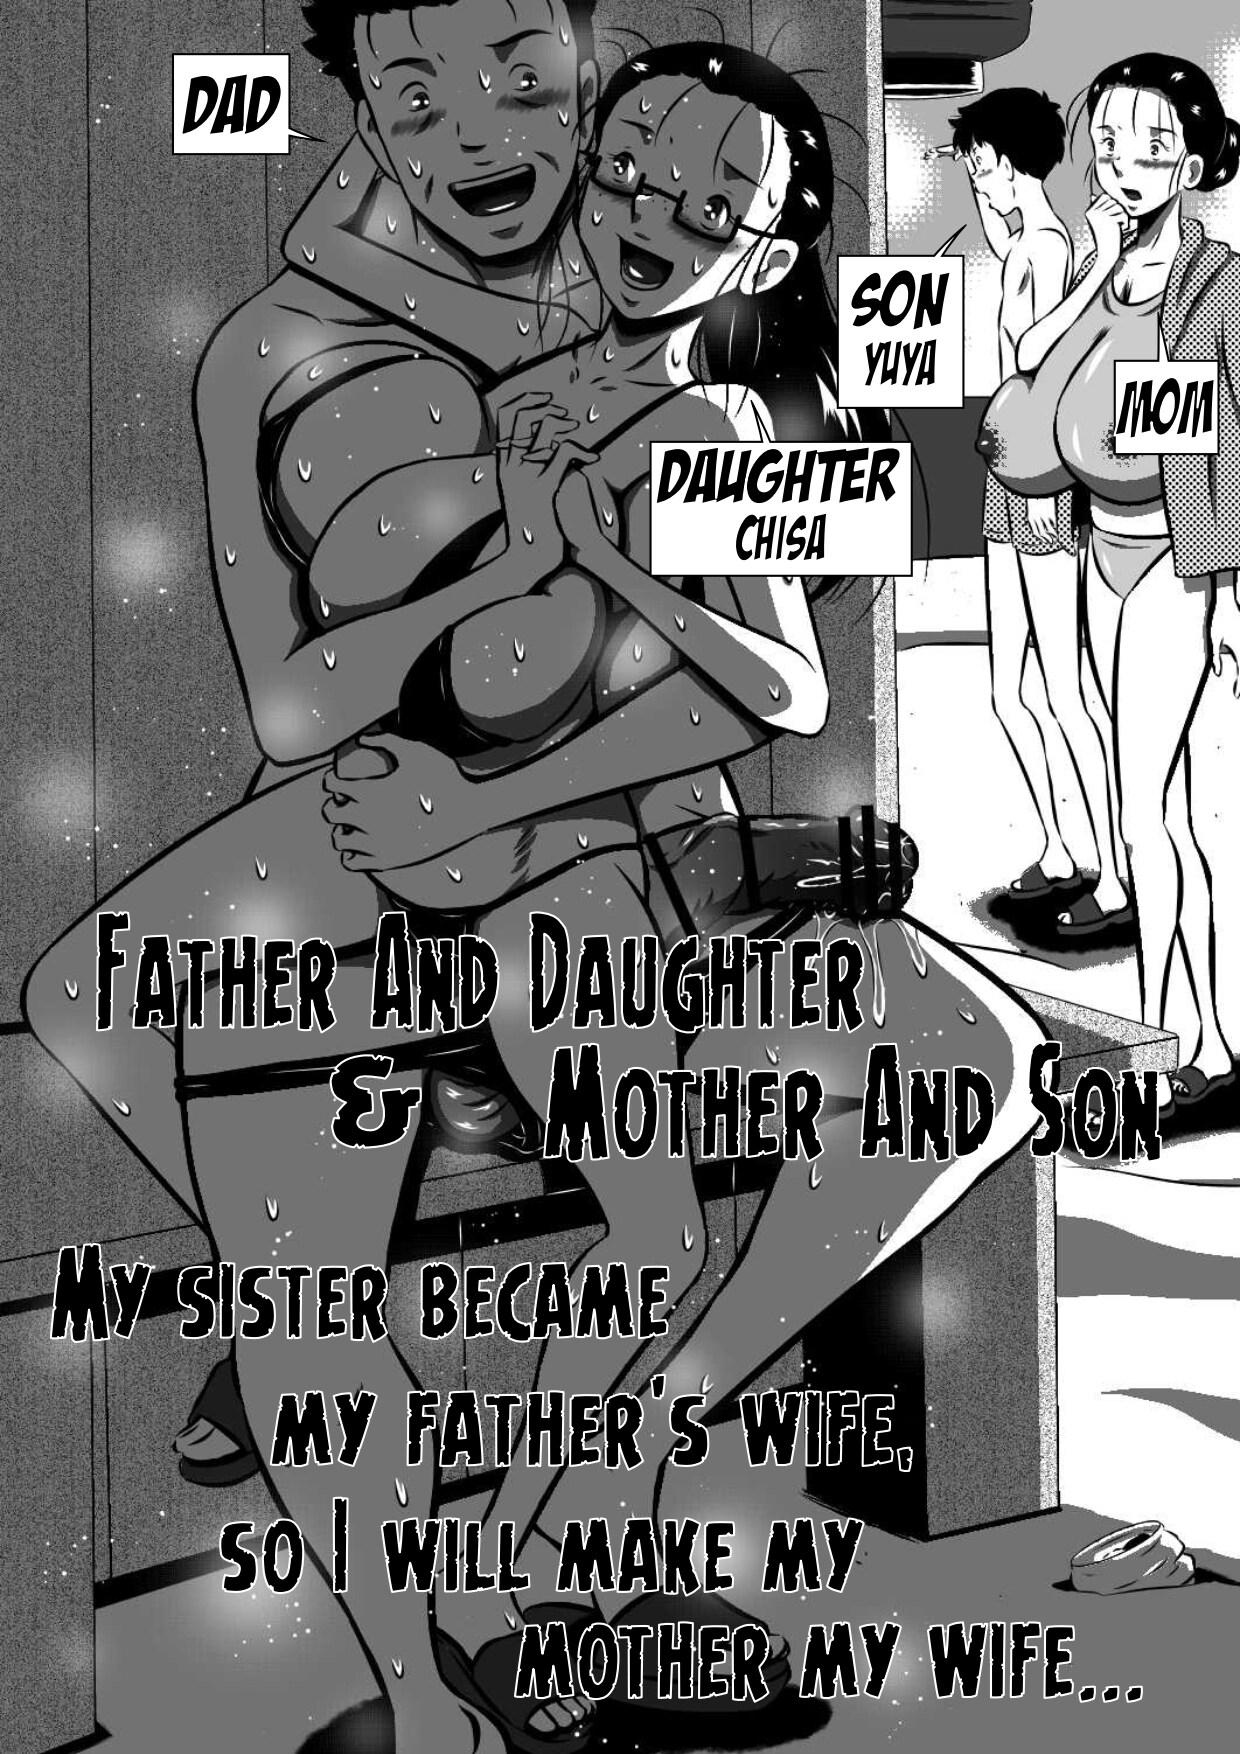 Couple Porn Father And Daughter and Mother And Son - Original English - Page 2